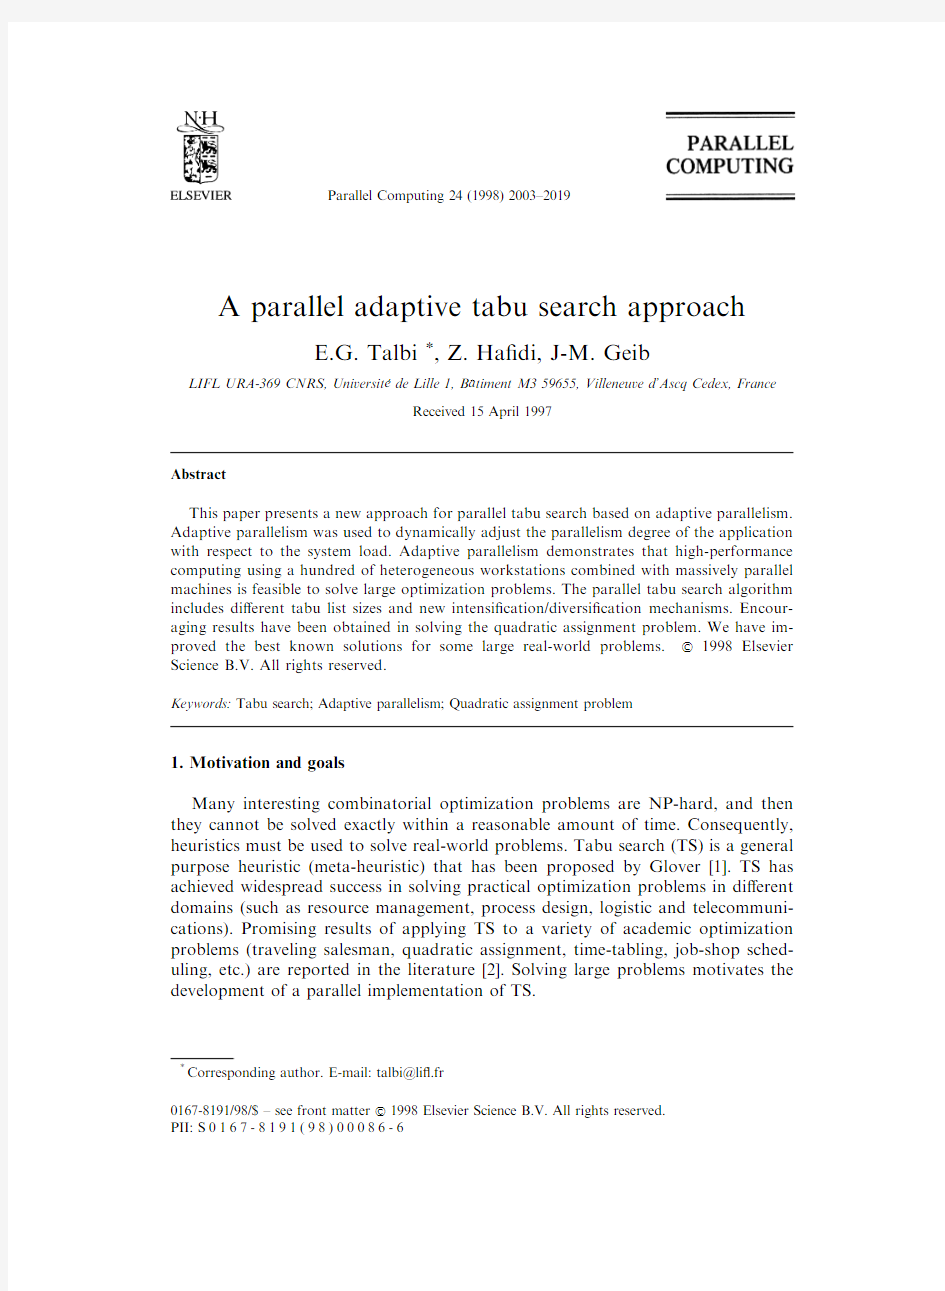 A parallel adaptive tabu search approach